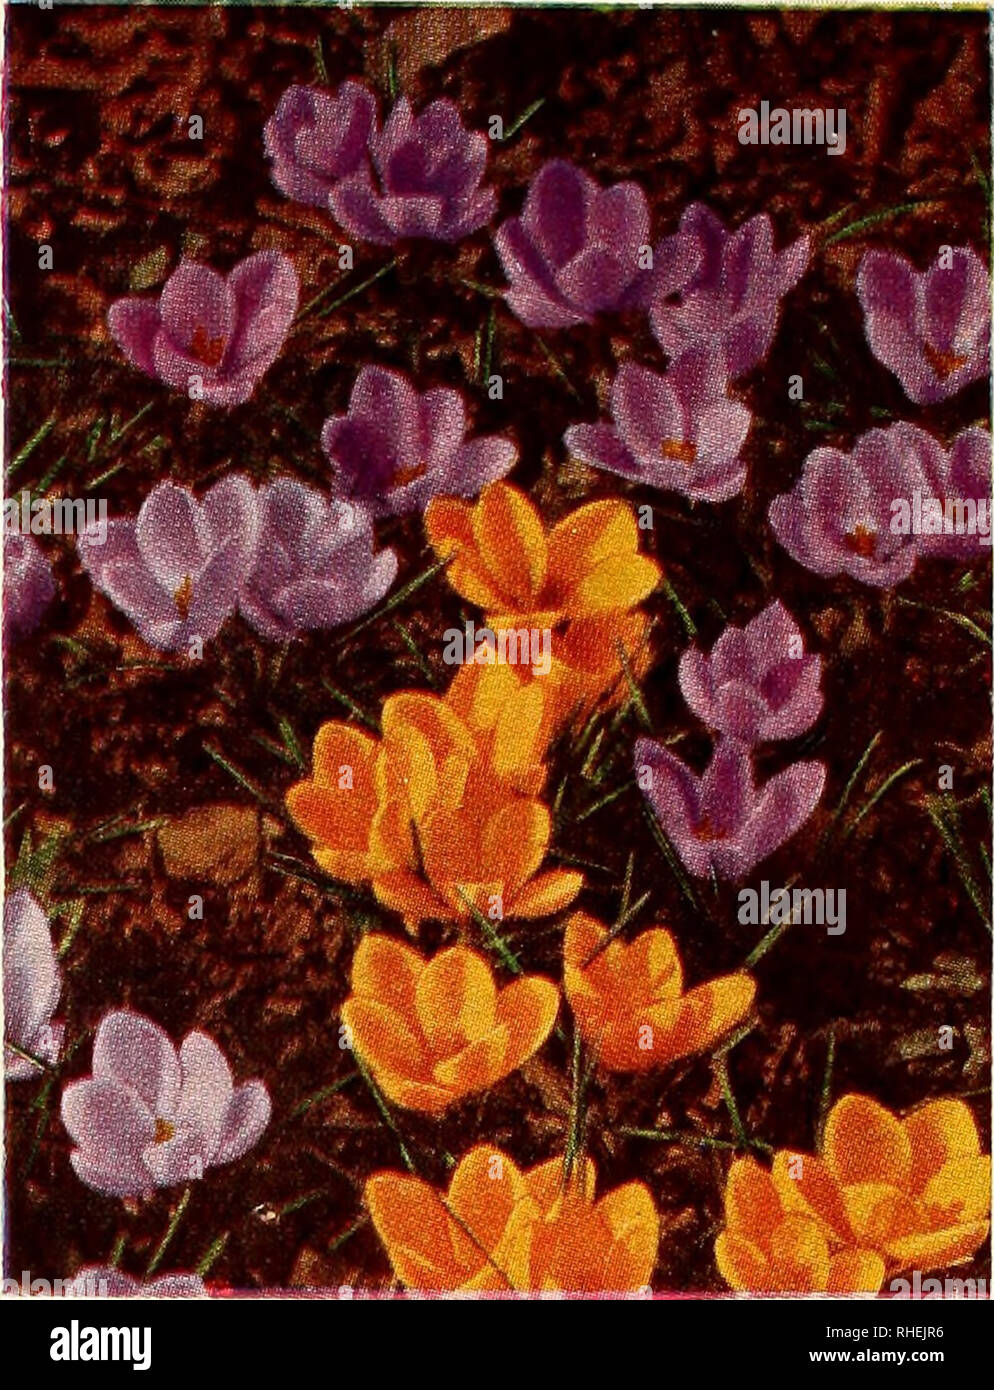 . Bolgiano's selected bulbs and plants for fall 1953 planting. Nurseries (Horticulture) Catalogs; Bulbs (Plants) Catalogs; Seeds Catalogs. CHIONODOXA 40c. per doz.; $2.75 per 100 COLCHICUM (Meadow Saffron). Autumn flowering. The flowers of this unusual plant resemble the Crocus. If planted in August or September the bulbs will flower in a very short time, but the foliage will not appear until spring. They will bloom, without soil or water, in a sunny window. Autumnale album. White. 35c. each; 3 for $1.00. Autumnale major. Rosy purple. 65c. each; 3 for $1.85. Autumn Queen. Large; violet-mauve.  Stock Photo